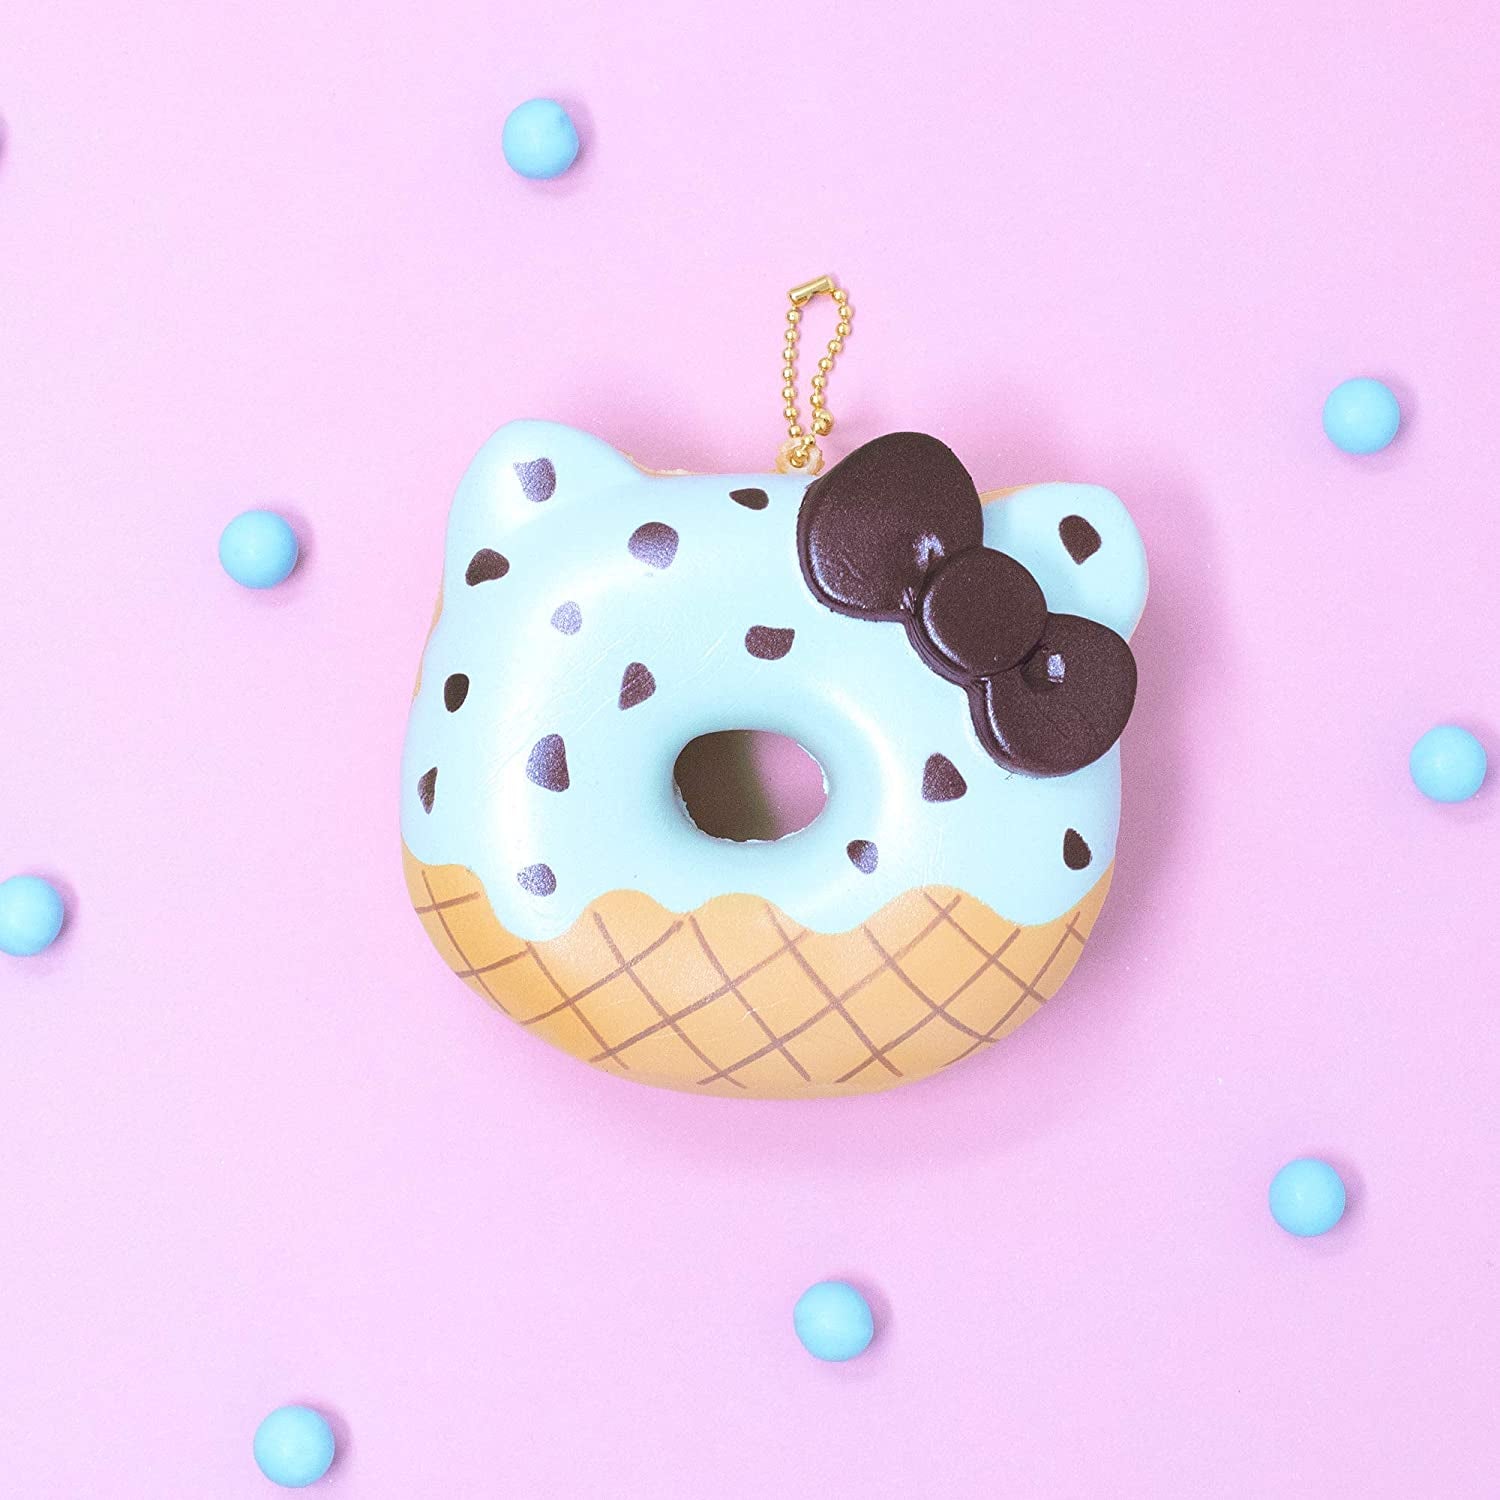 Sanrio Hello Kitty Ice Cream Donut Slow Rising Squishy Toy Keychain (Mint Chocolate) for Party Favors, Stress Balls, Birthday Gift Boxes, Kawaii Squishies for Kids, Girls, Boys, Adults